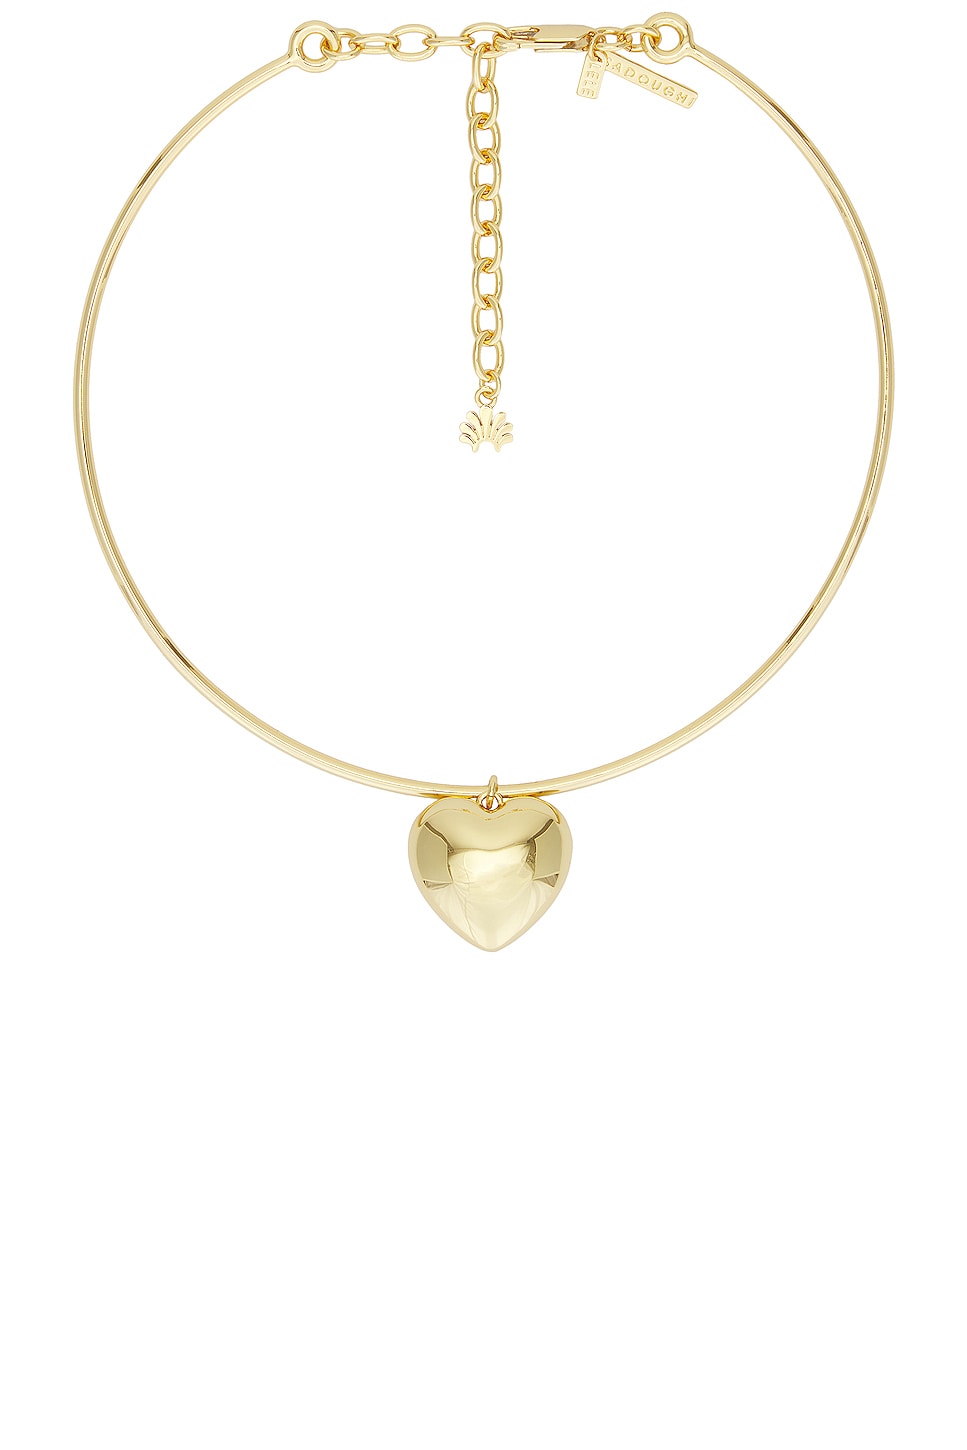 Image 1 of Lele Sadoughi Heart Choker Necklace in Gold